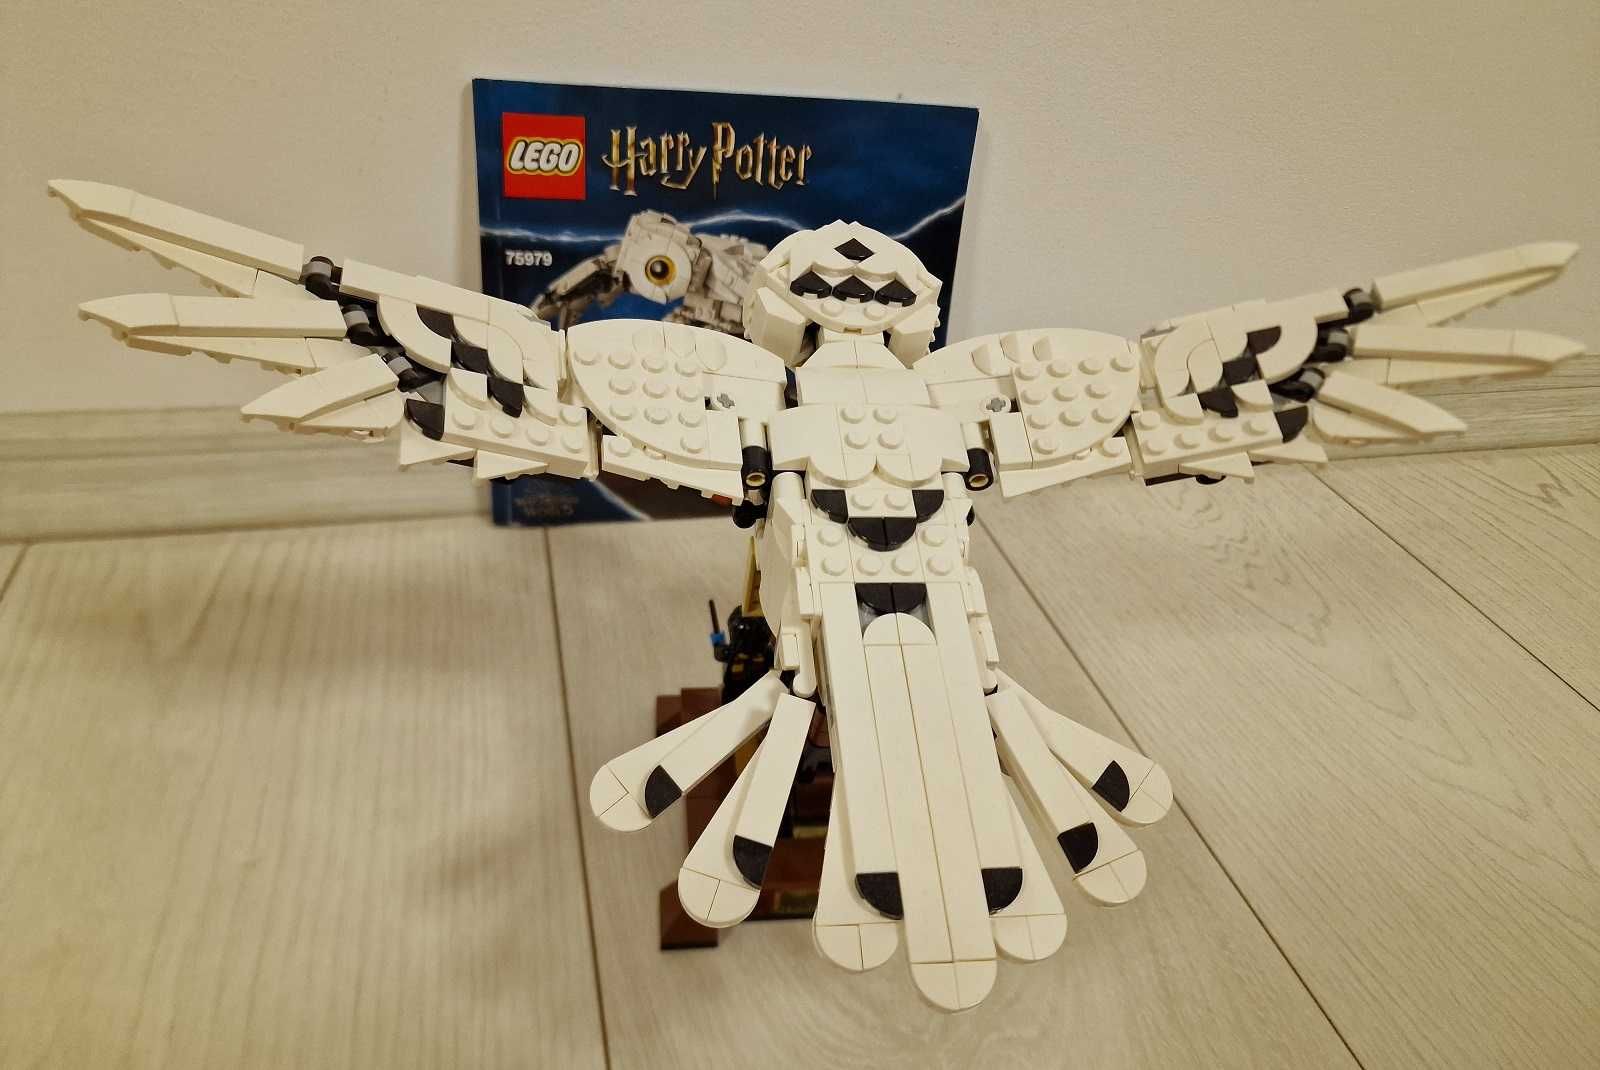 LEGO Harry Potter 75979 Hedwig 630 piese (recomandat 10+)